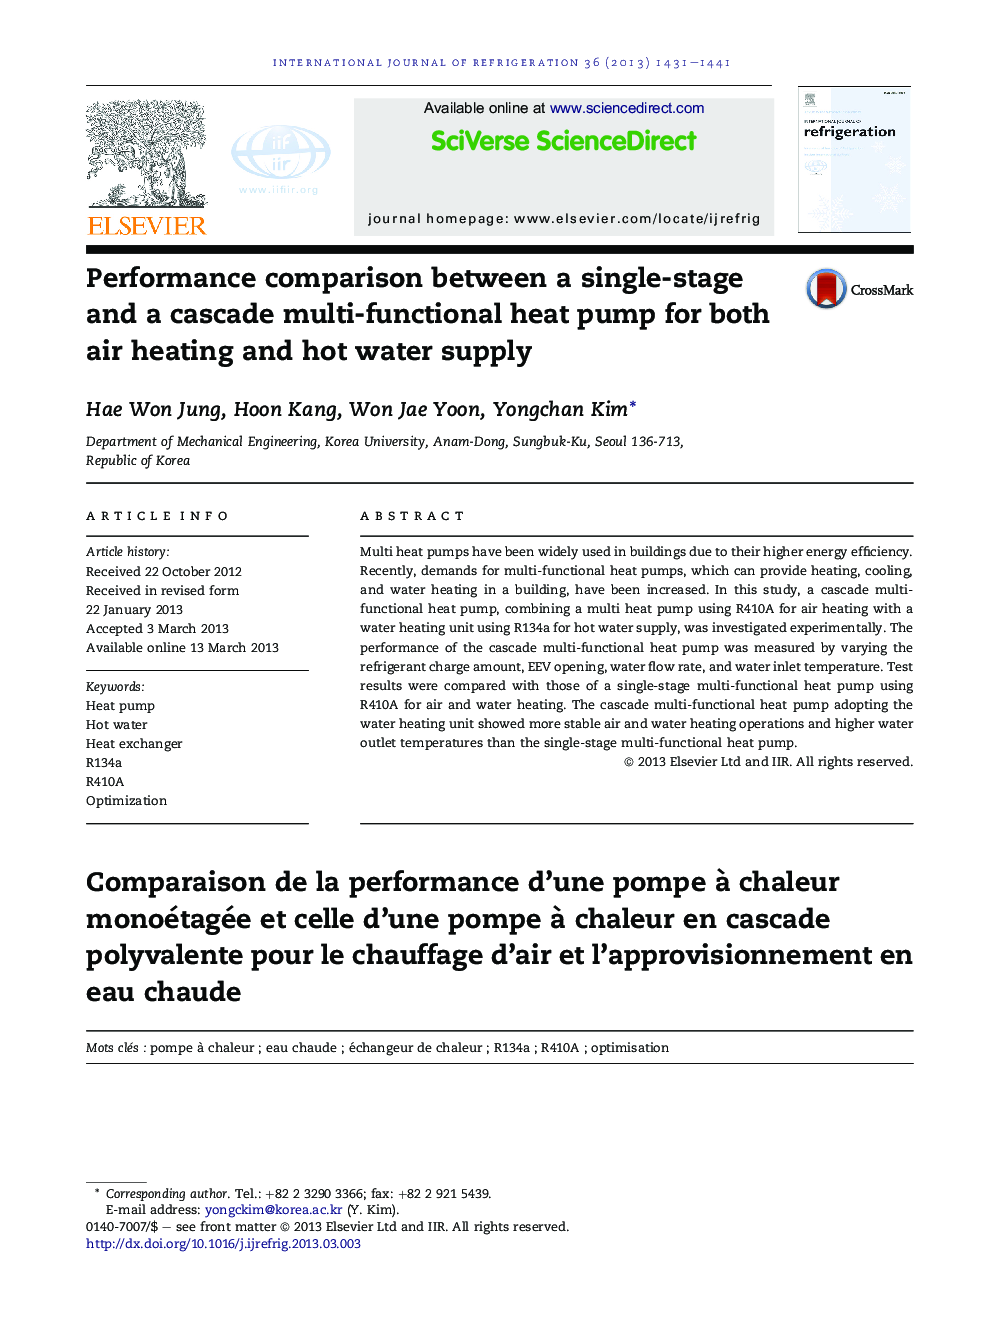 Performance comparison between a single-stage and a cascade multi-functional heat pump for both air heating and hot water supply